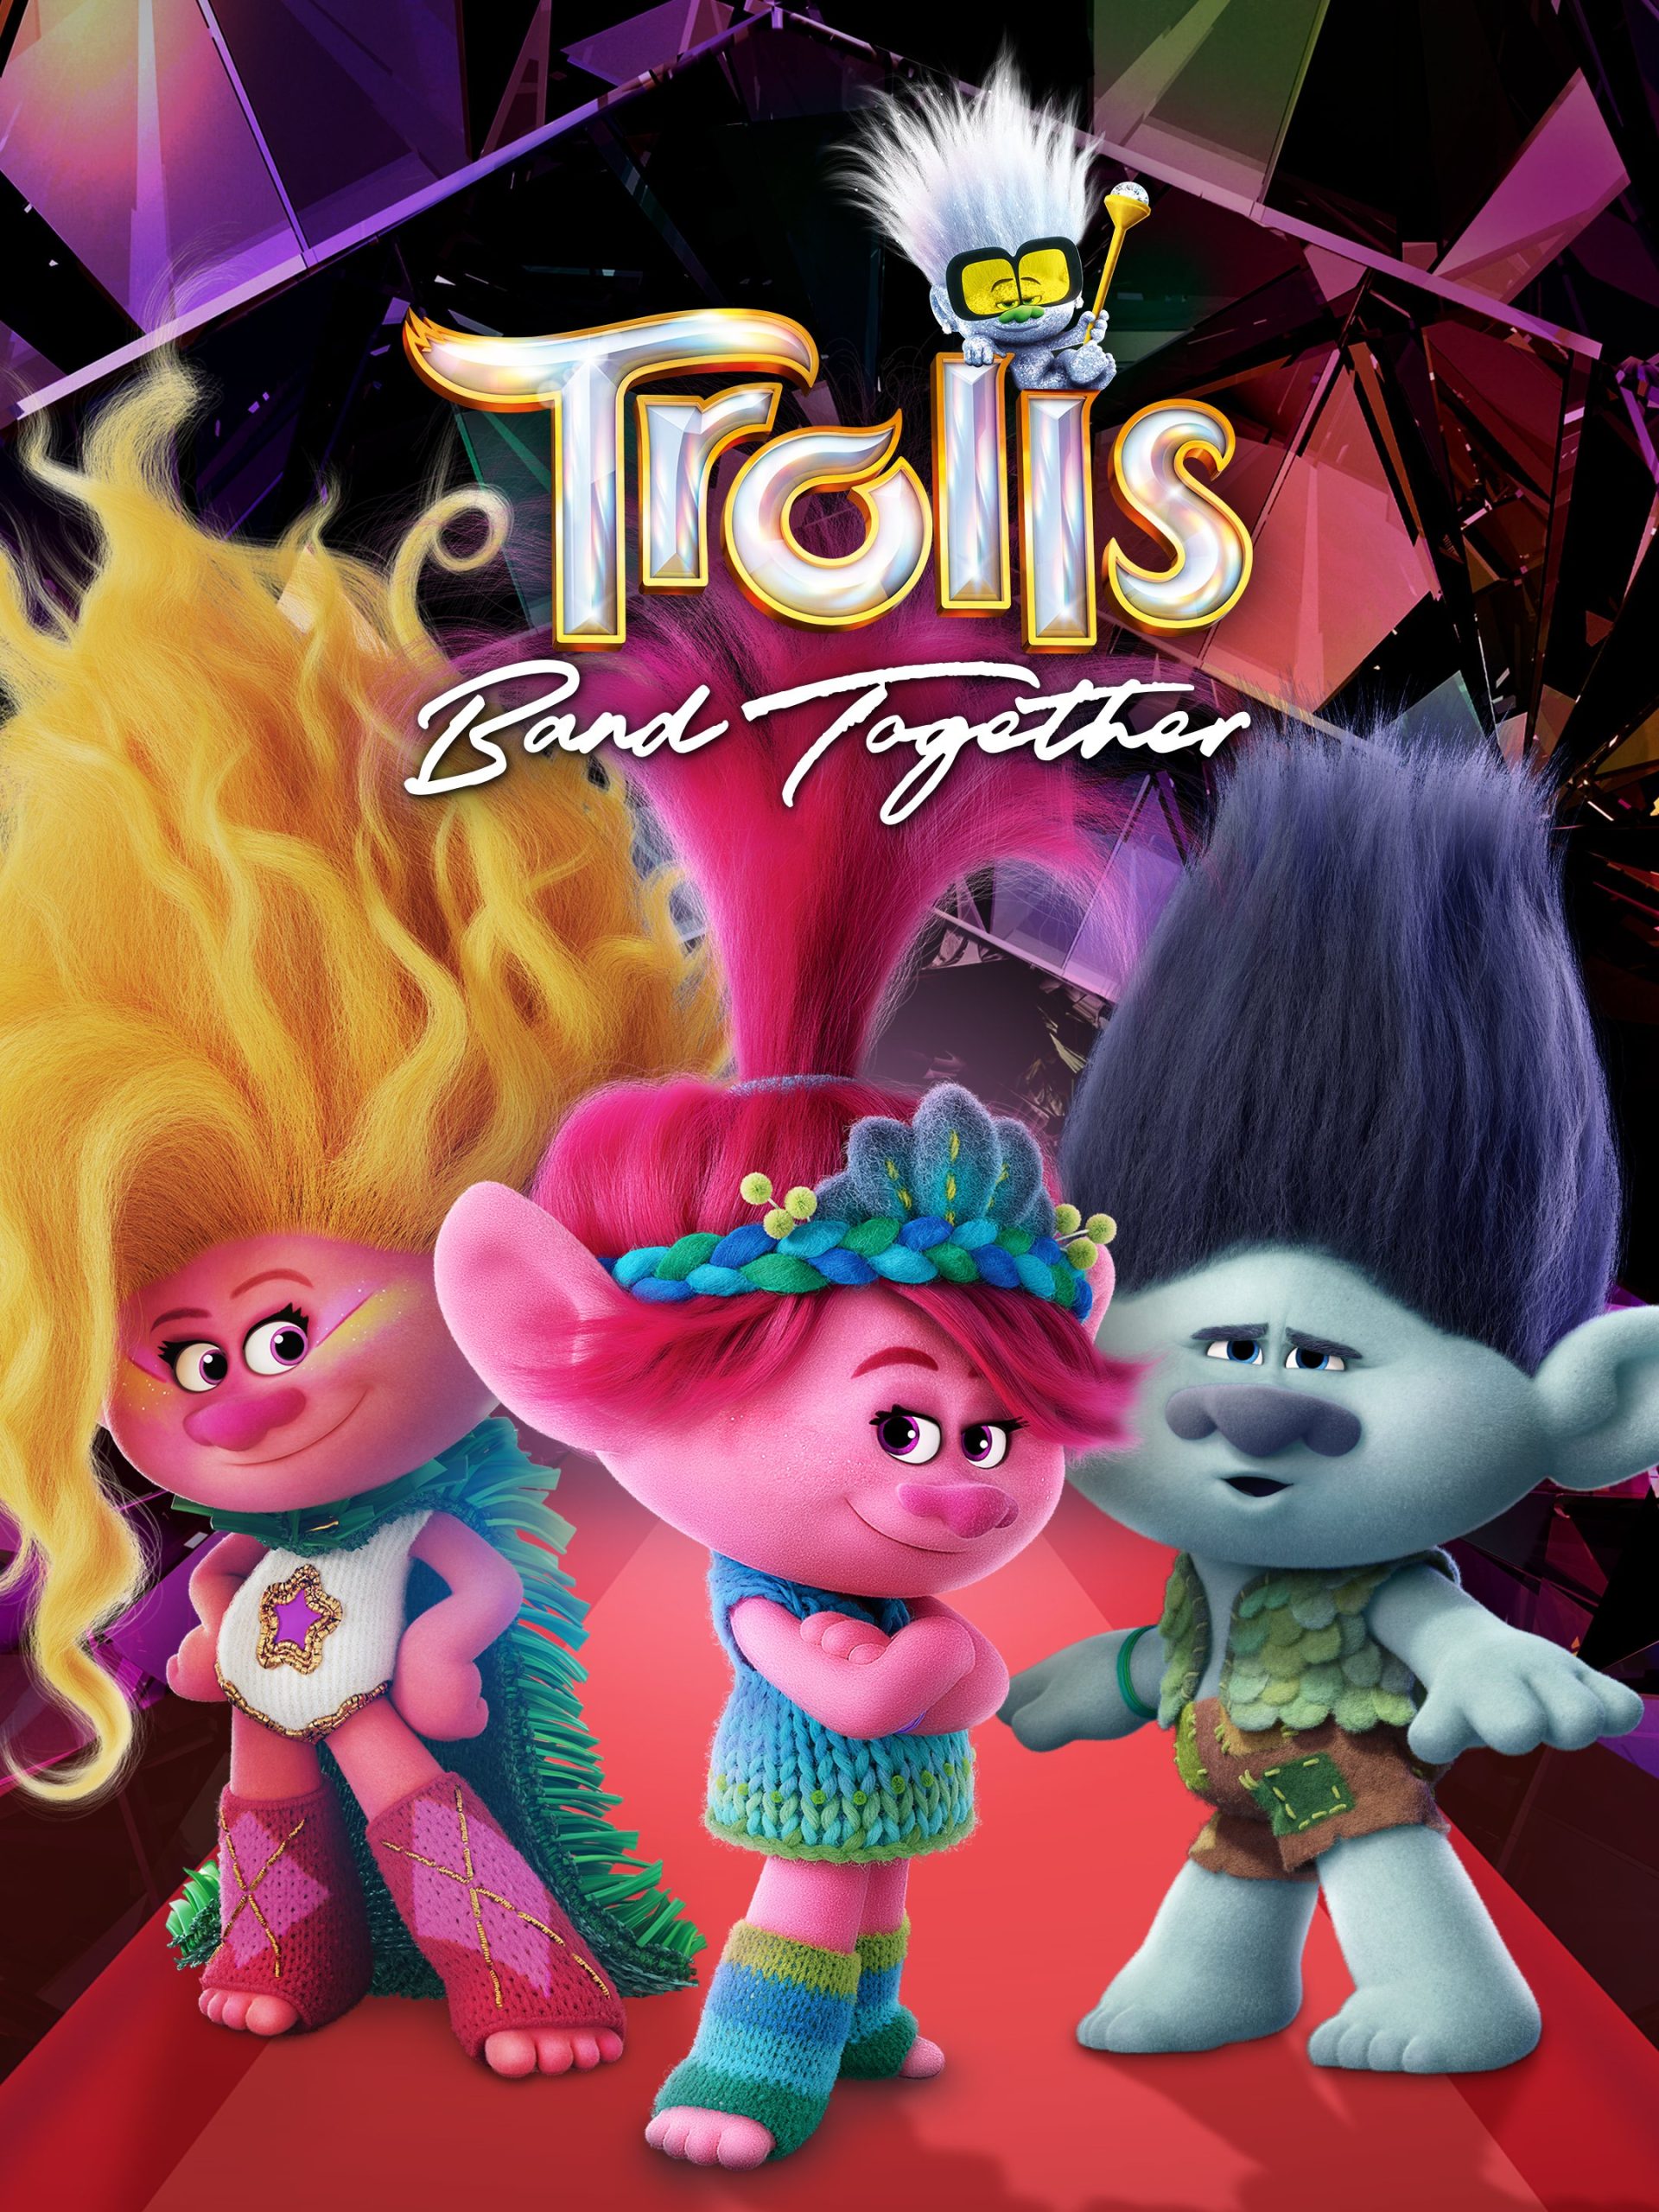 Movie Poster: Trolls Band Together